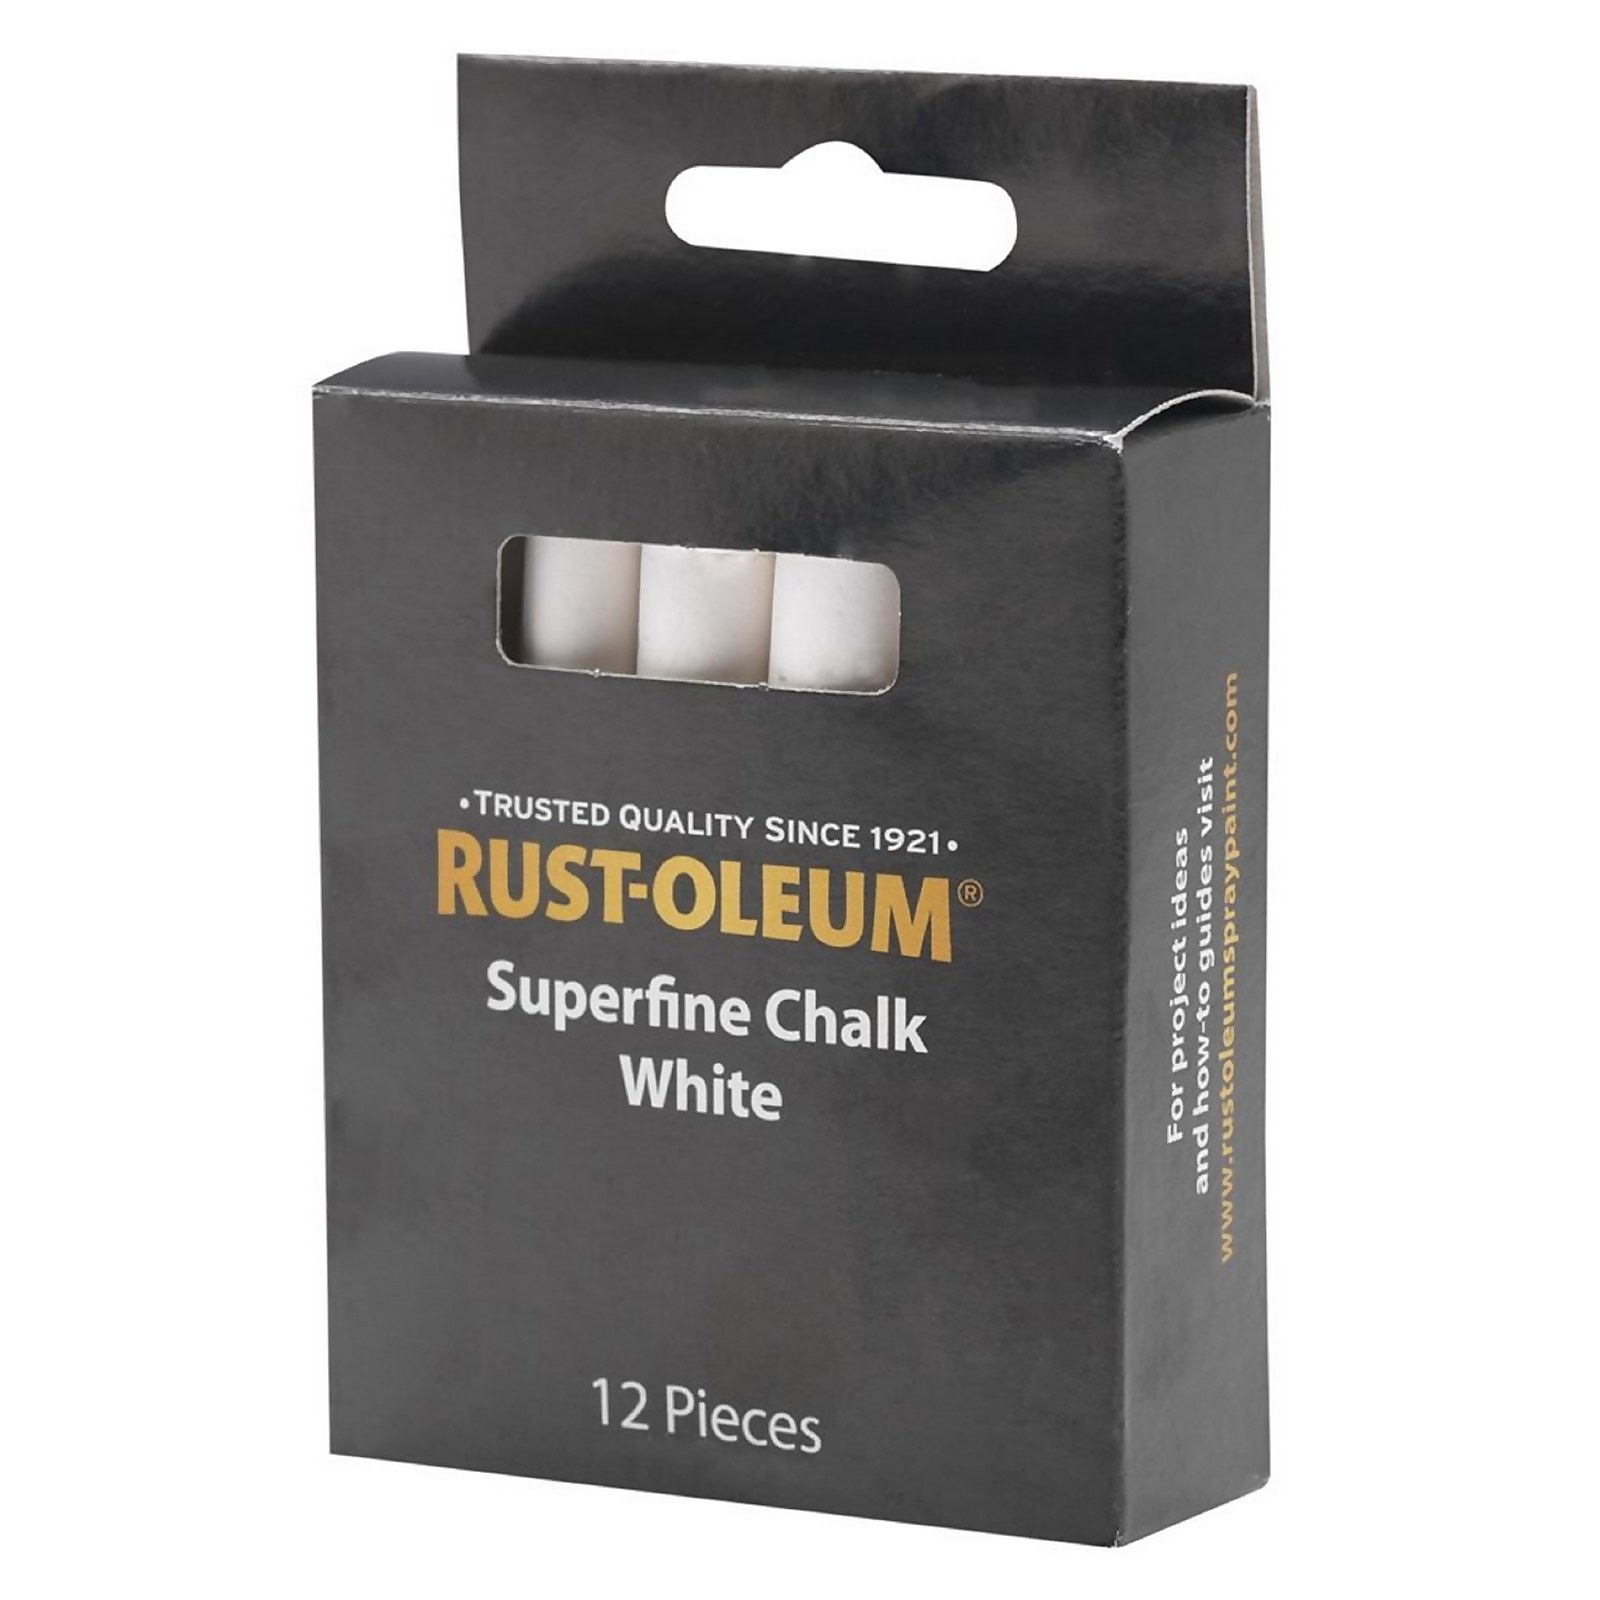 Photo of Rust-oleum Chalk - Pack Of 12 - White